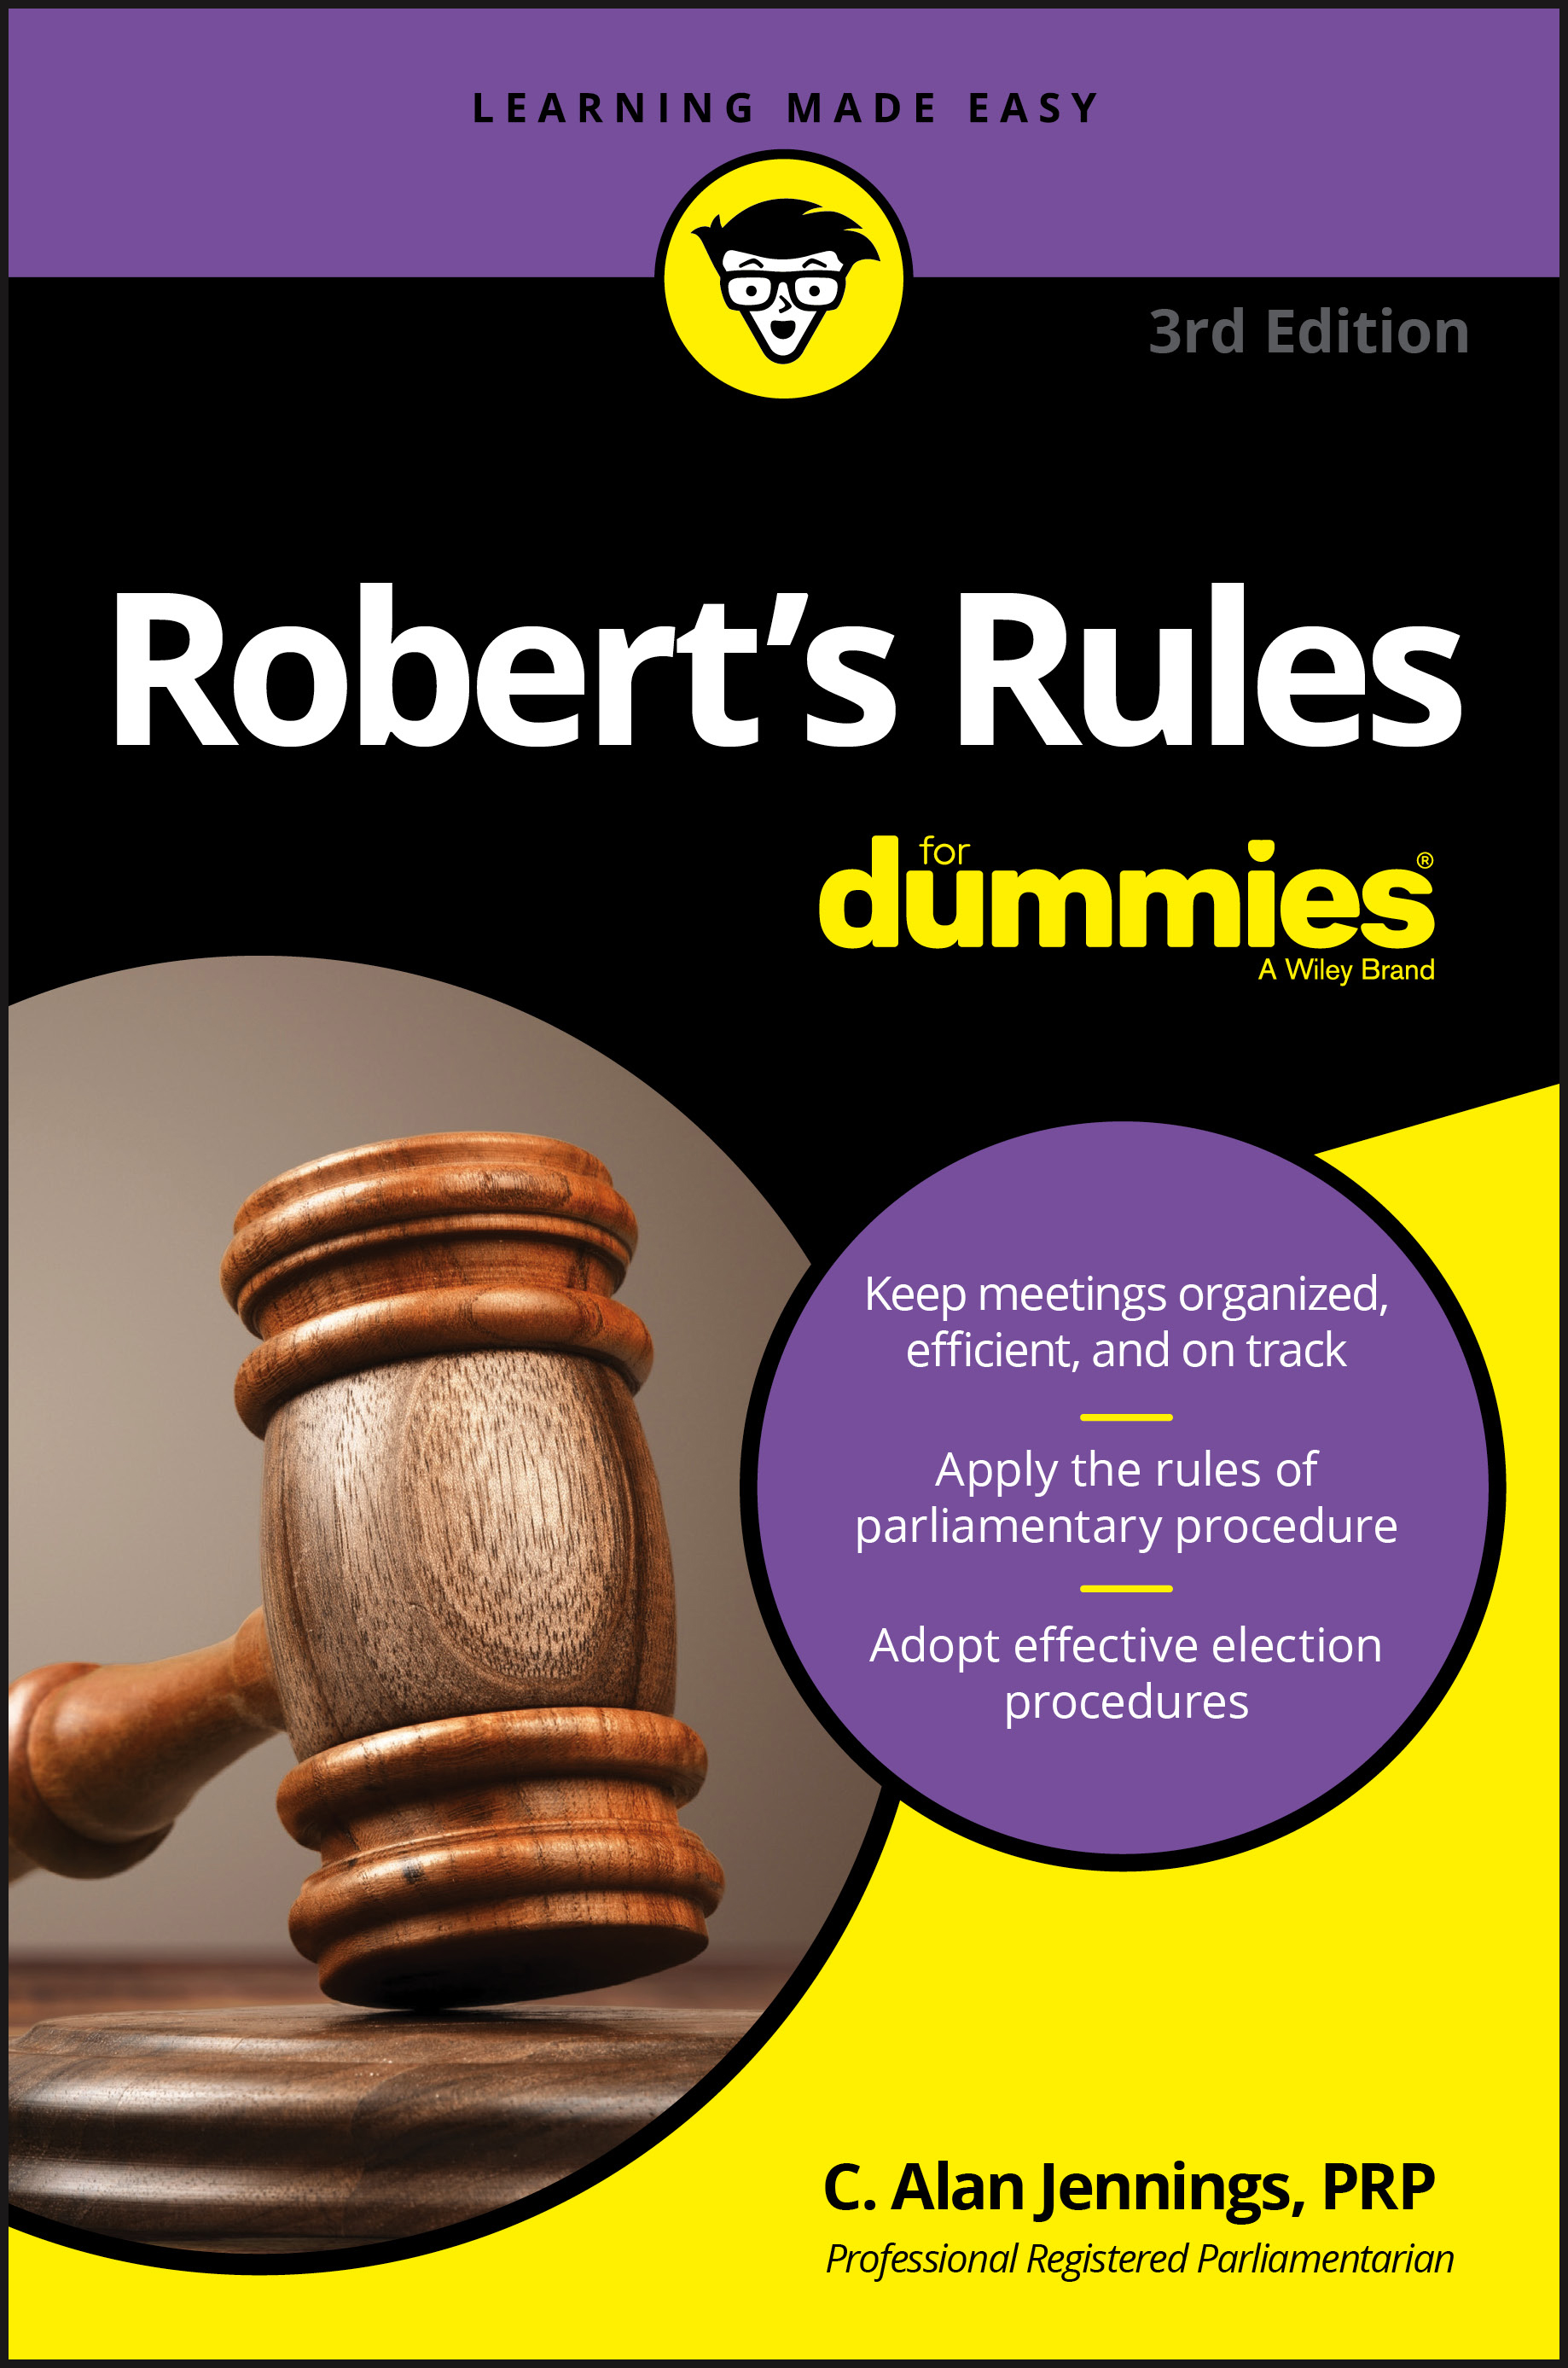 Robert's Rules: The Ultimate Guide to Understanding and Practicing Robert's Rule  epub mobi pdf fb2